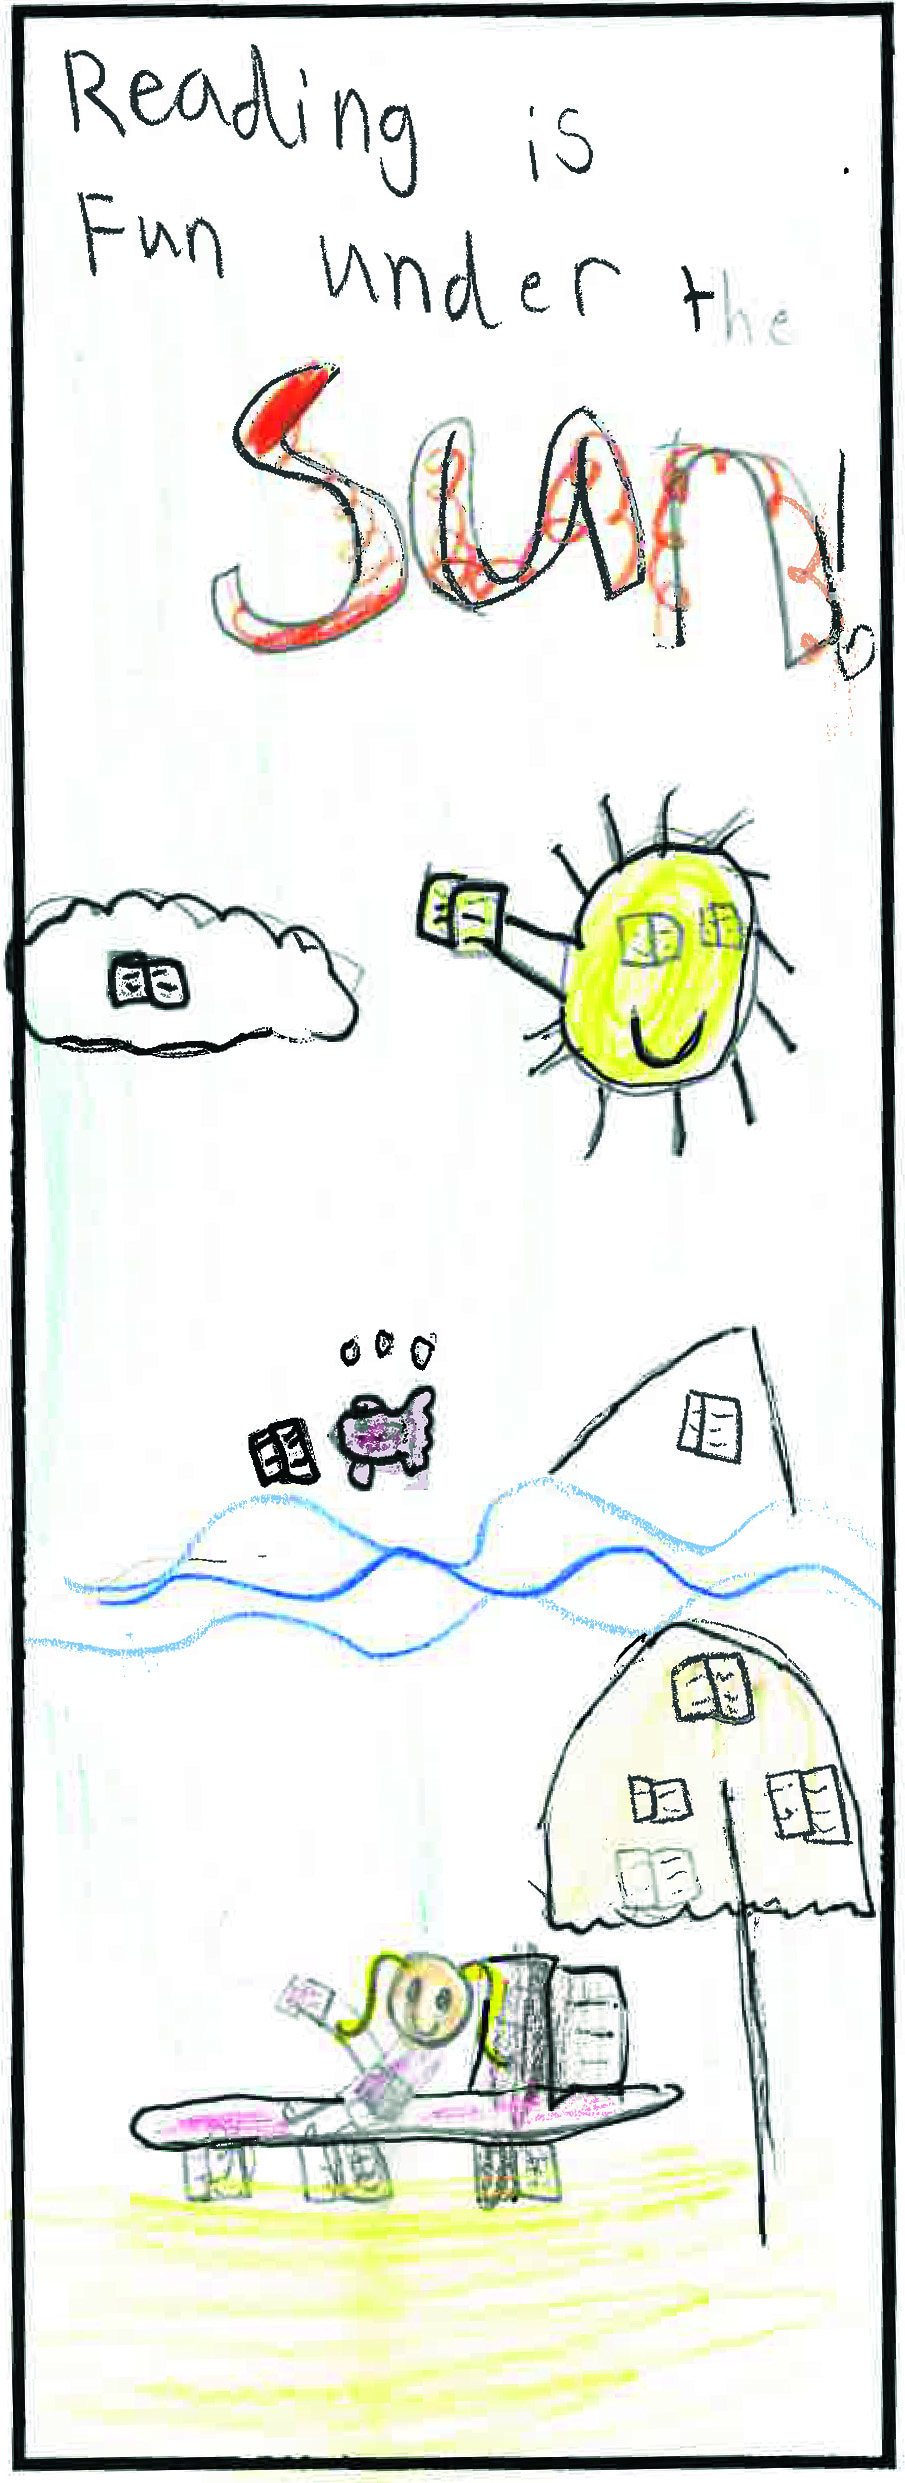 August 2020 bookmark contest winner illustration depicting a girl at the beach reading in a lawn chair with the sun reading in the sky as well. The text says "Reading is fun under the sun"